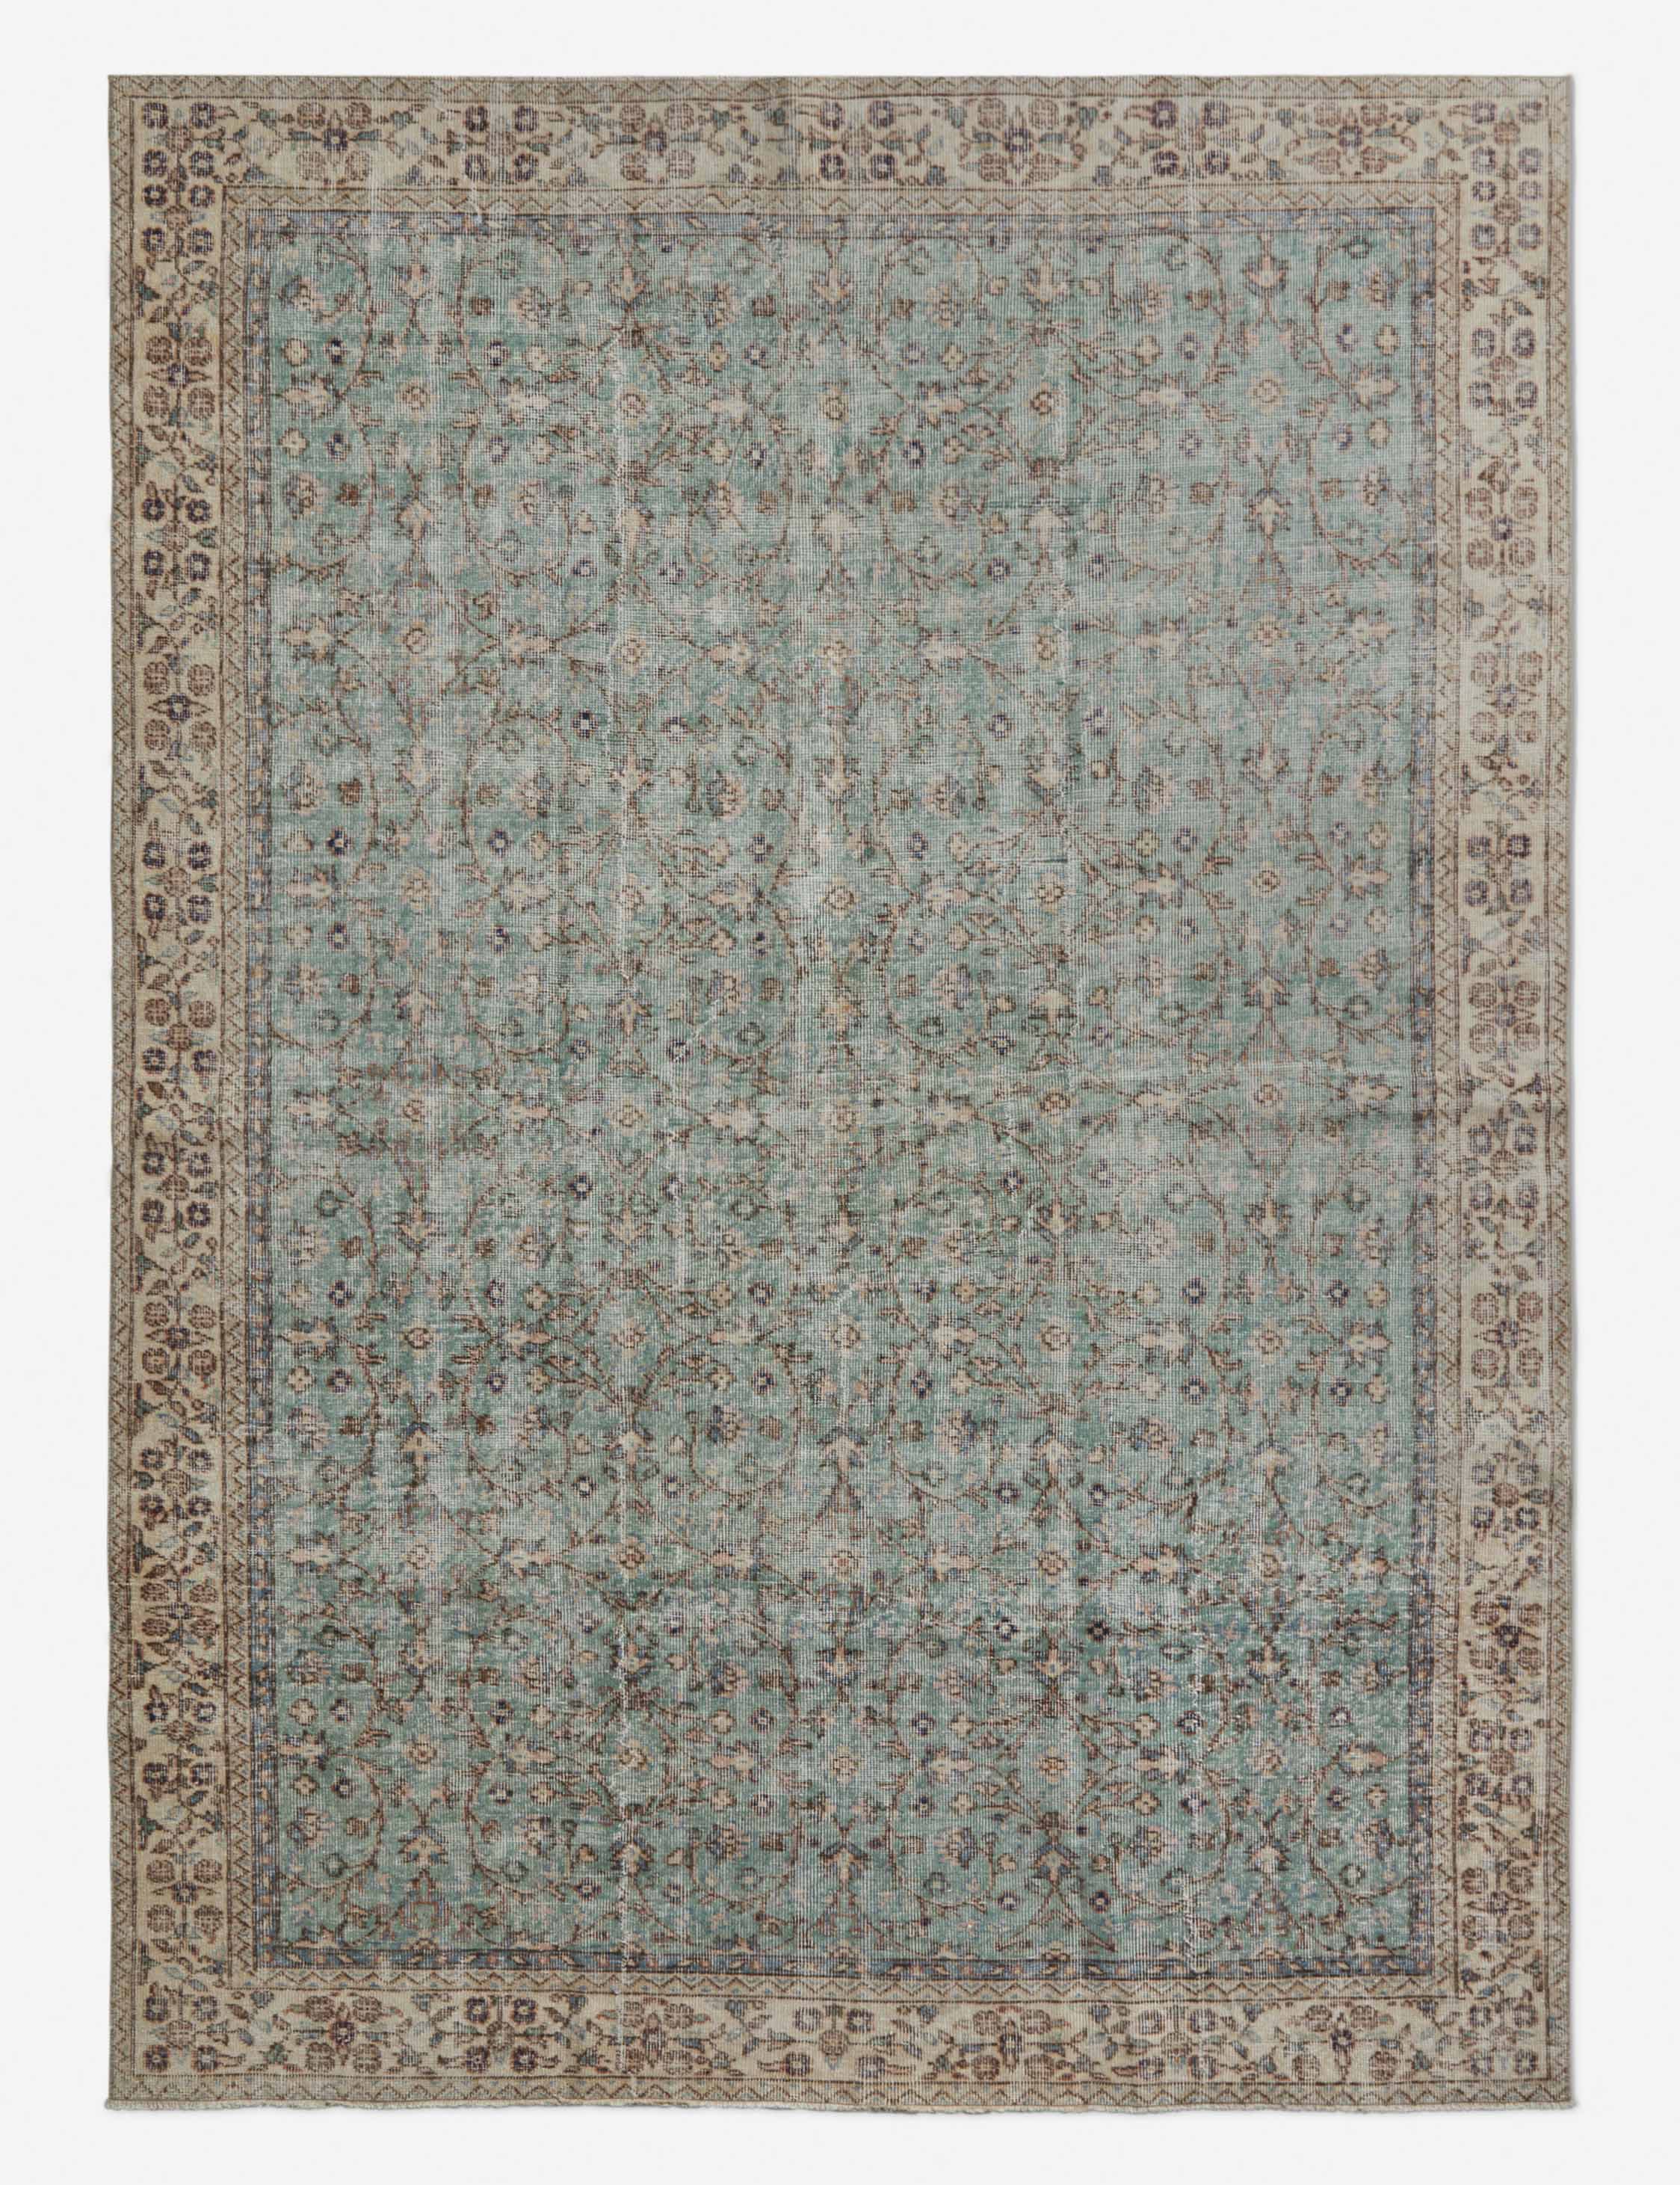 Vintage Turkish Hand-Knotted Wool Rug No. 185, 6'9